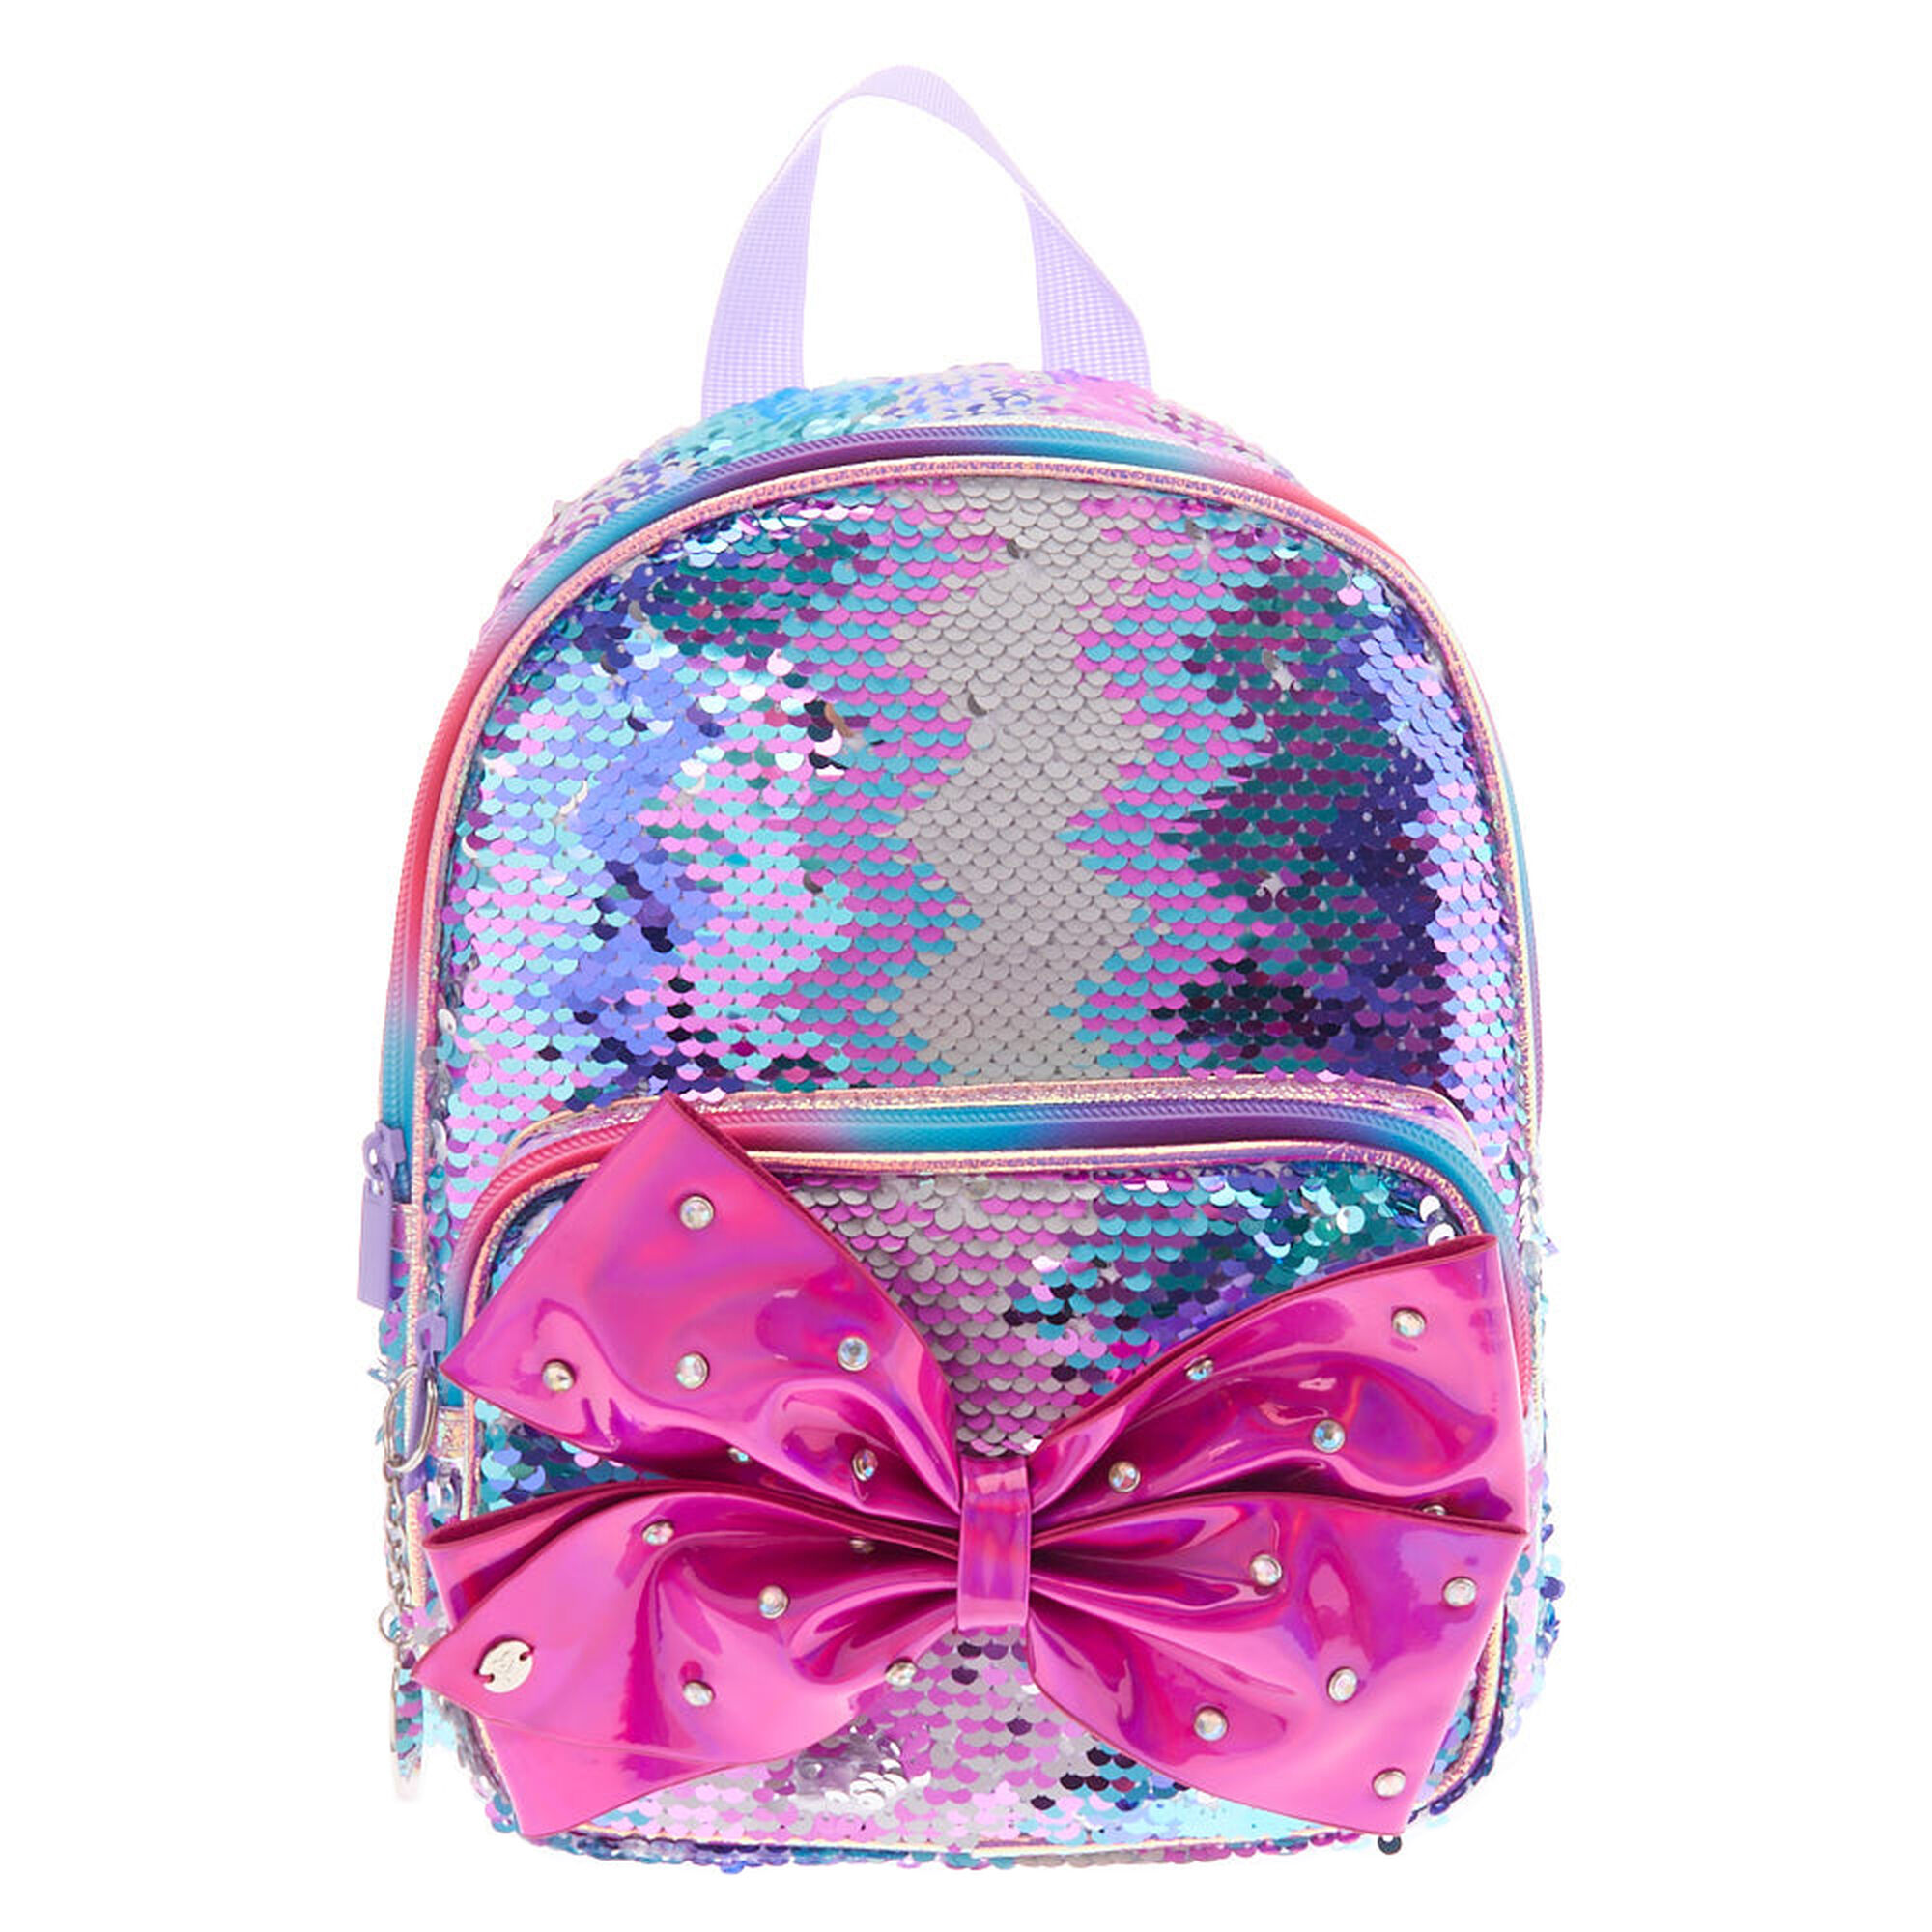 Jojo siwa™ Reversible Sequins Mini Backpack – Pink | Claire's